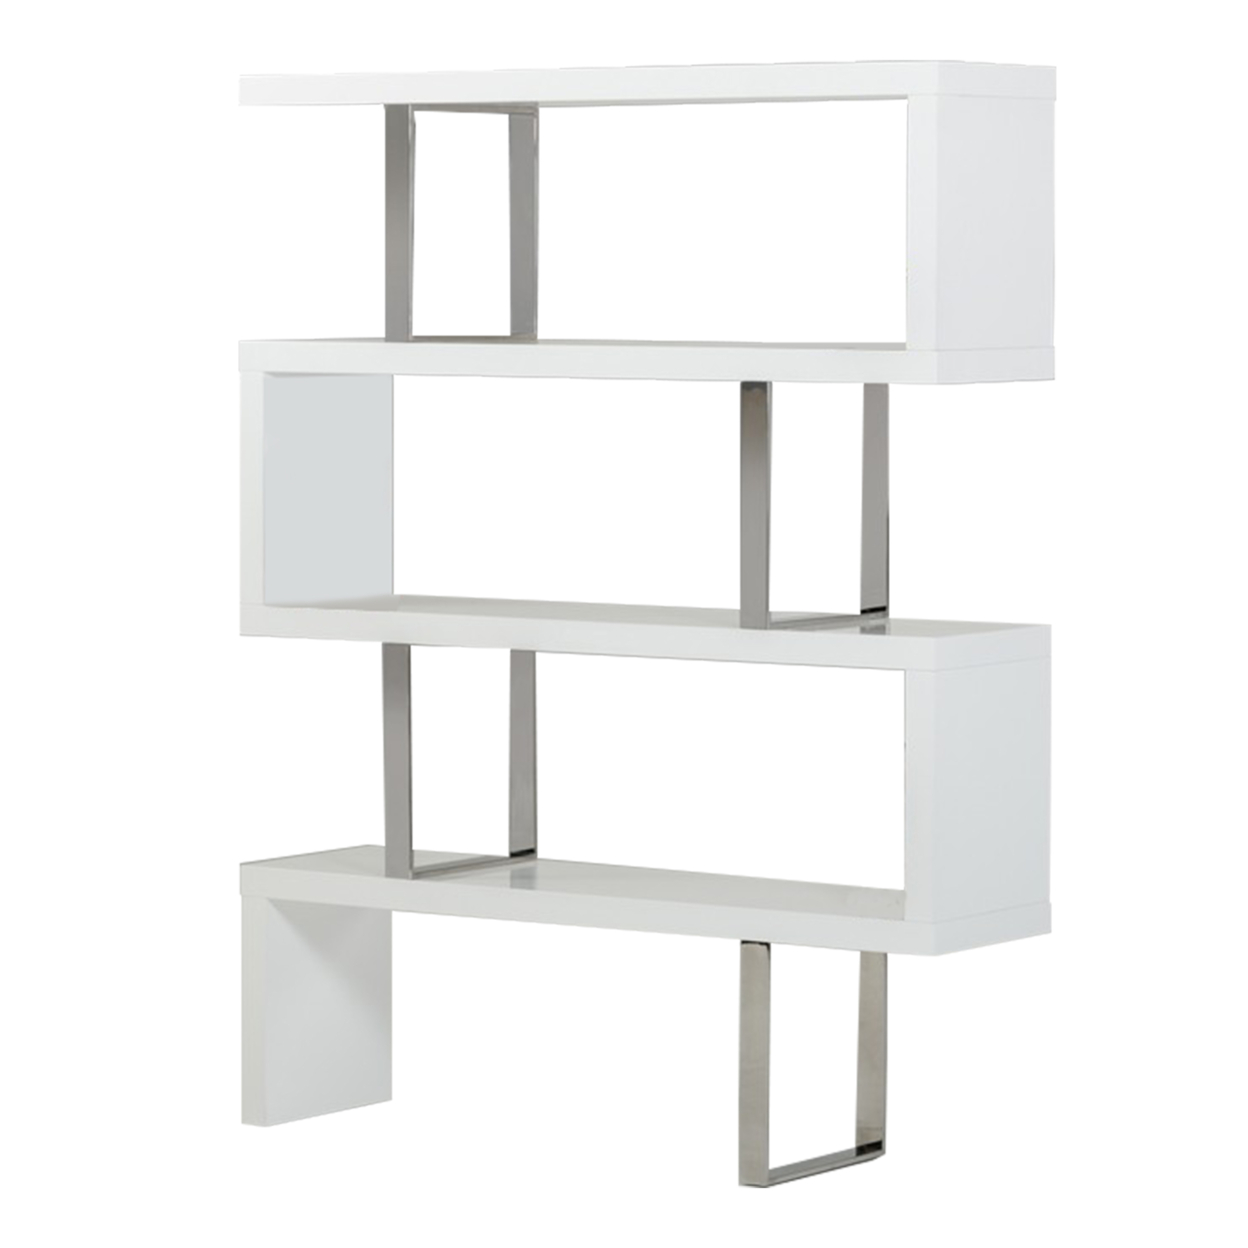 Zig Zag Wooden Frame Shelf Unit With Metal Braces Support, White And Silver- Saltoro Sherpi